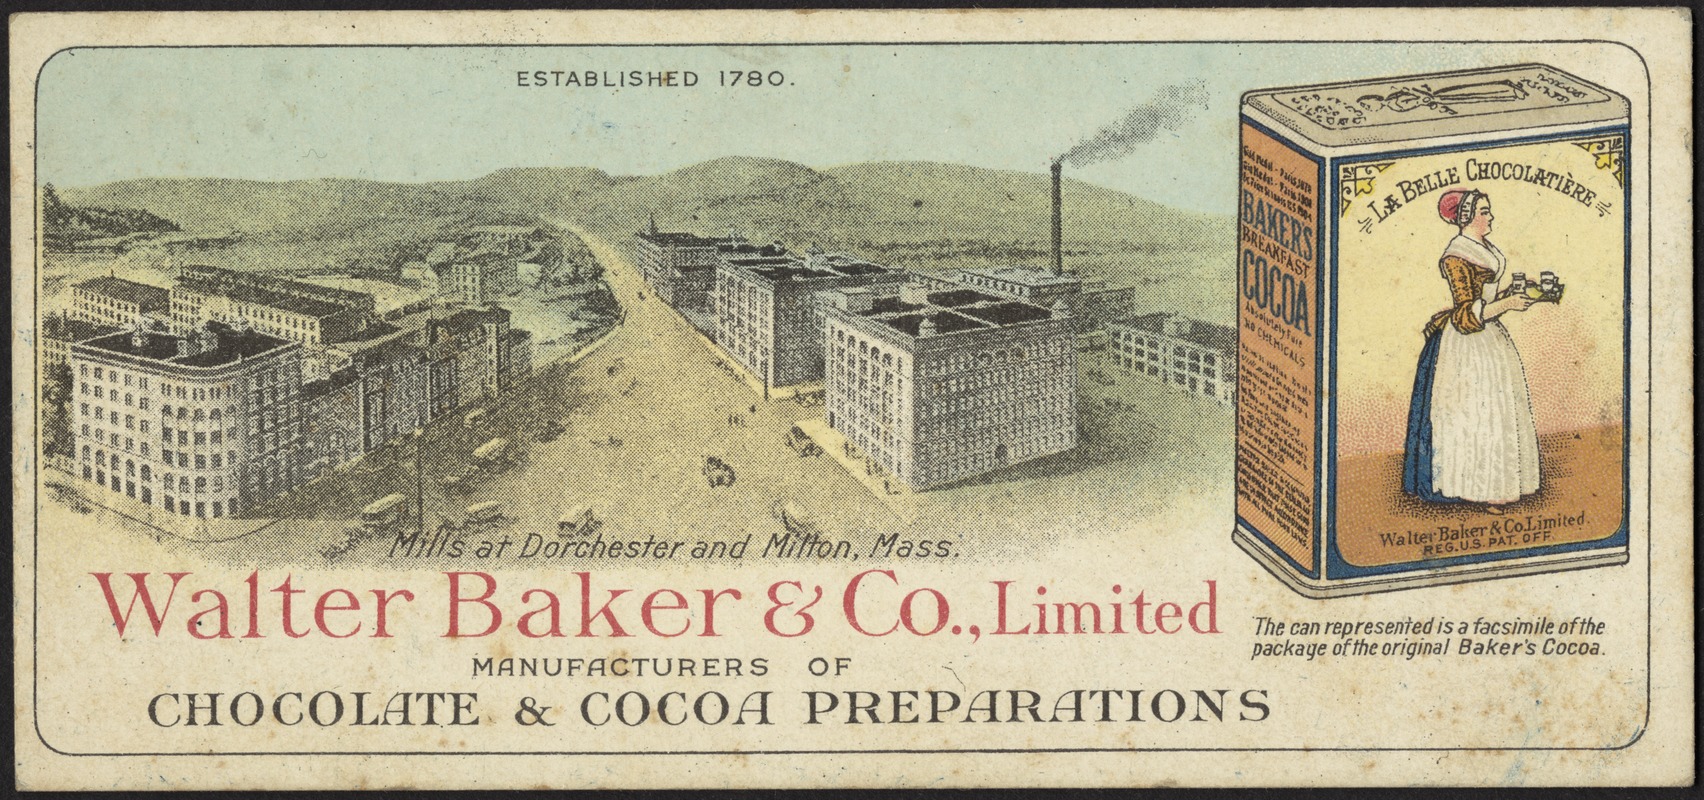 Walter Baker & Co., Limited. Manufacturers of chocolate and cocoa preparations.